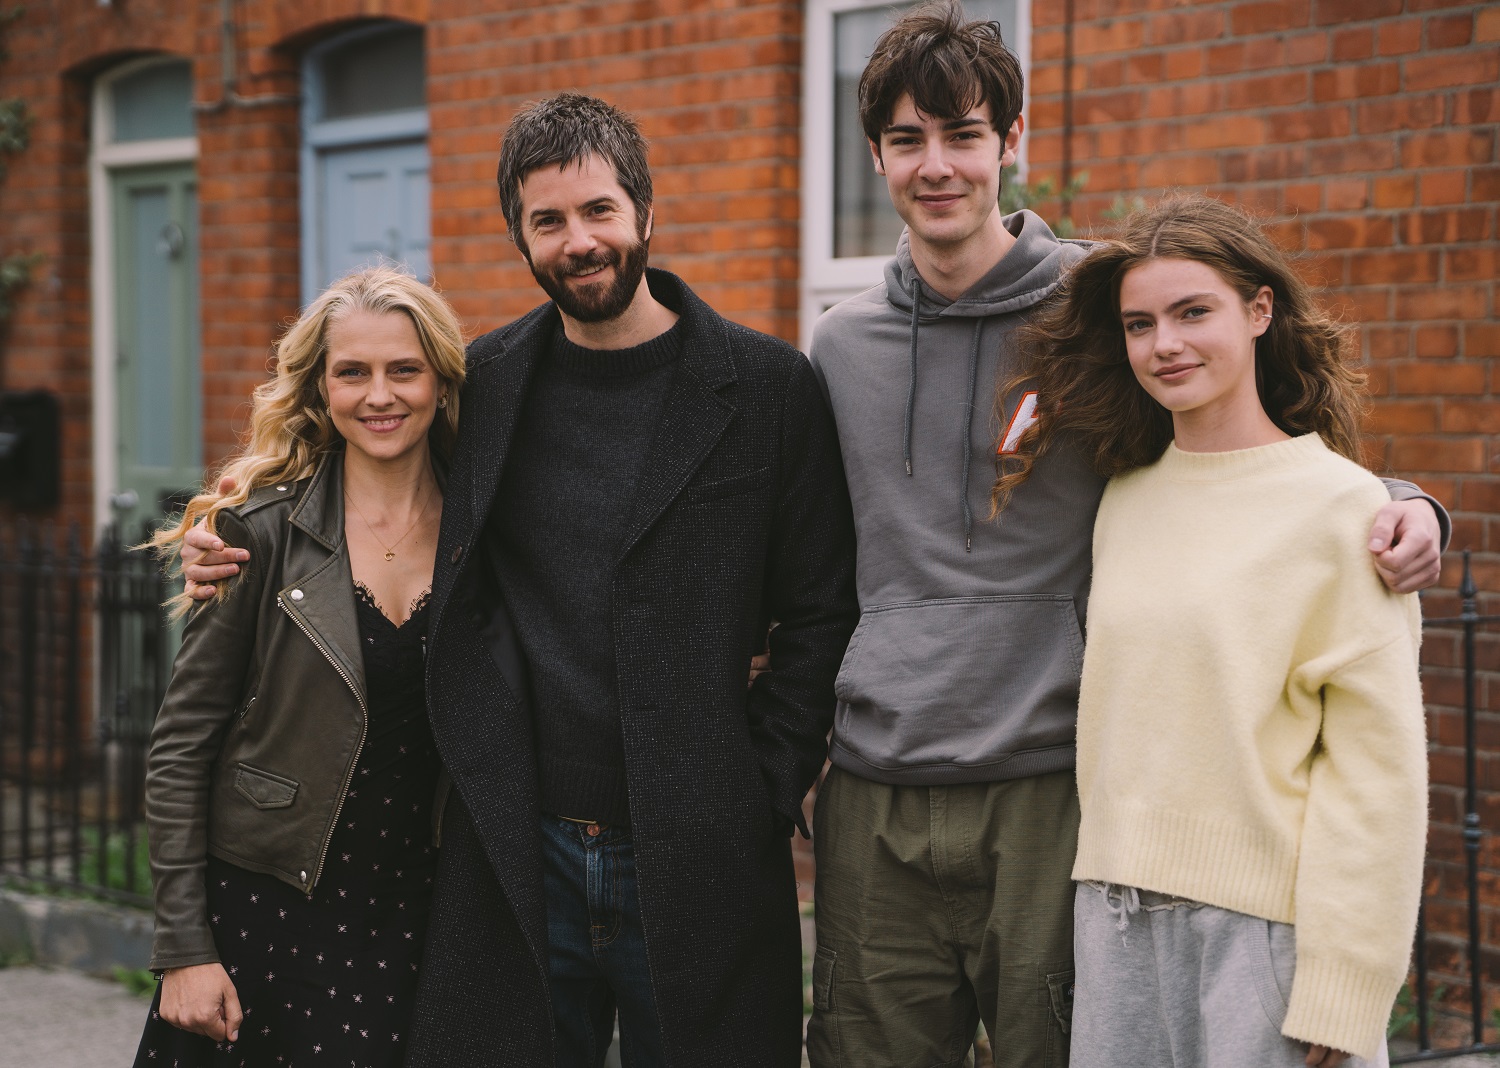 Florence Hunt, Rory Walton-Smith added to 'Mix Tape' as filming begins in Dublin